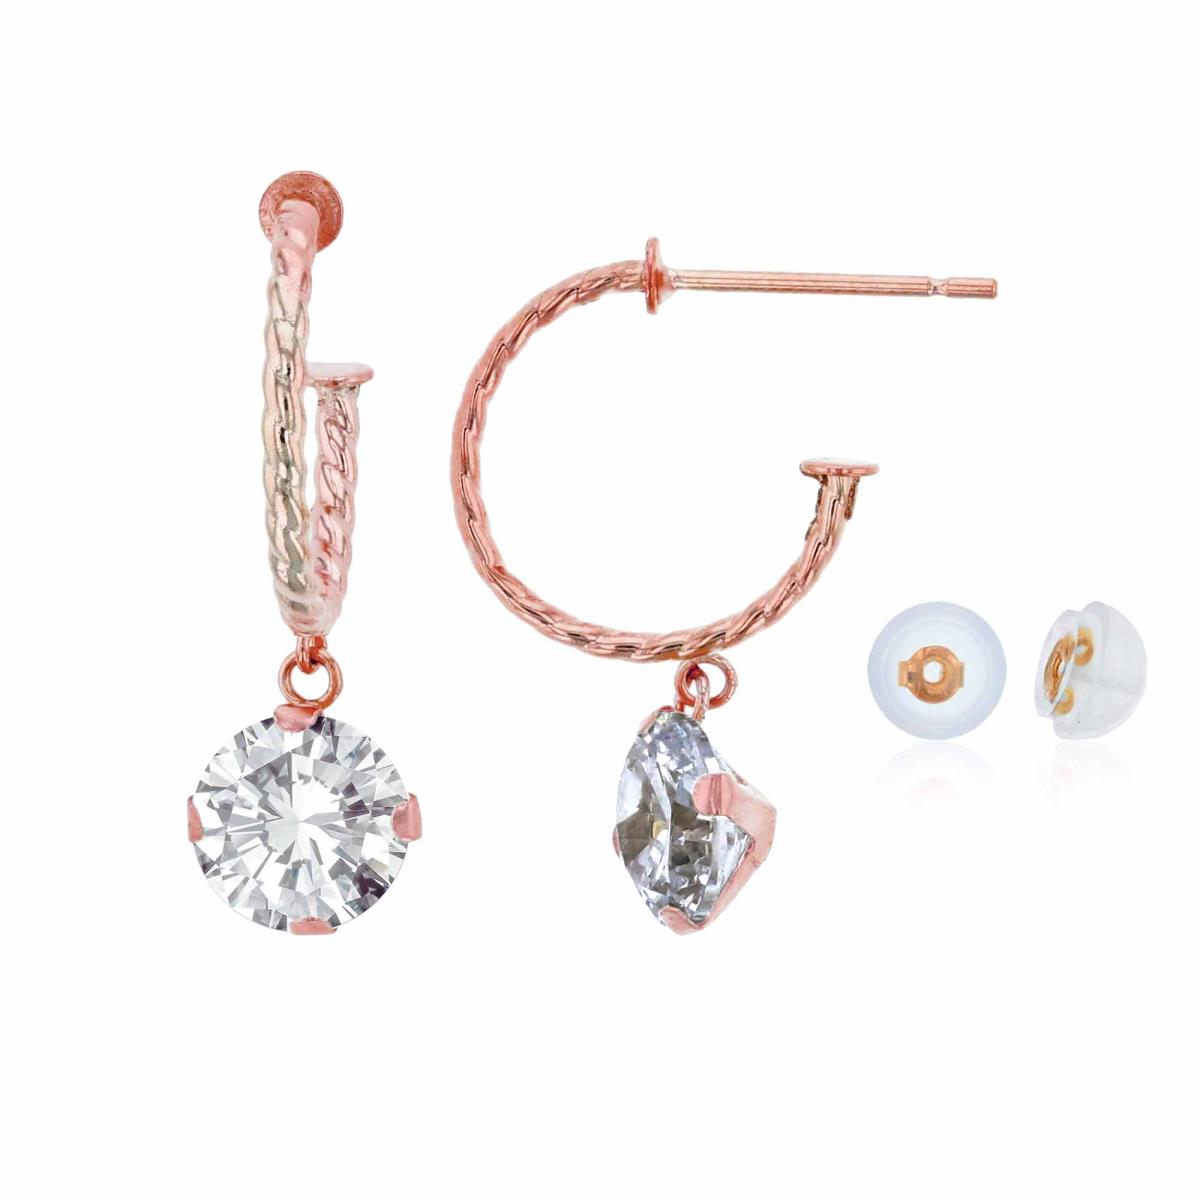 10K Rose Gold 12mm Rope Half-Hoop with 6mm Rd White Topaz Martini Drop Earring with Silicone Back